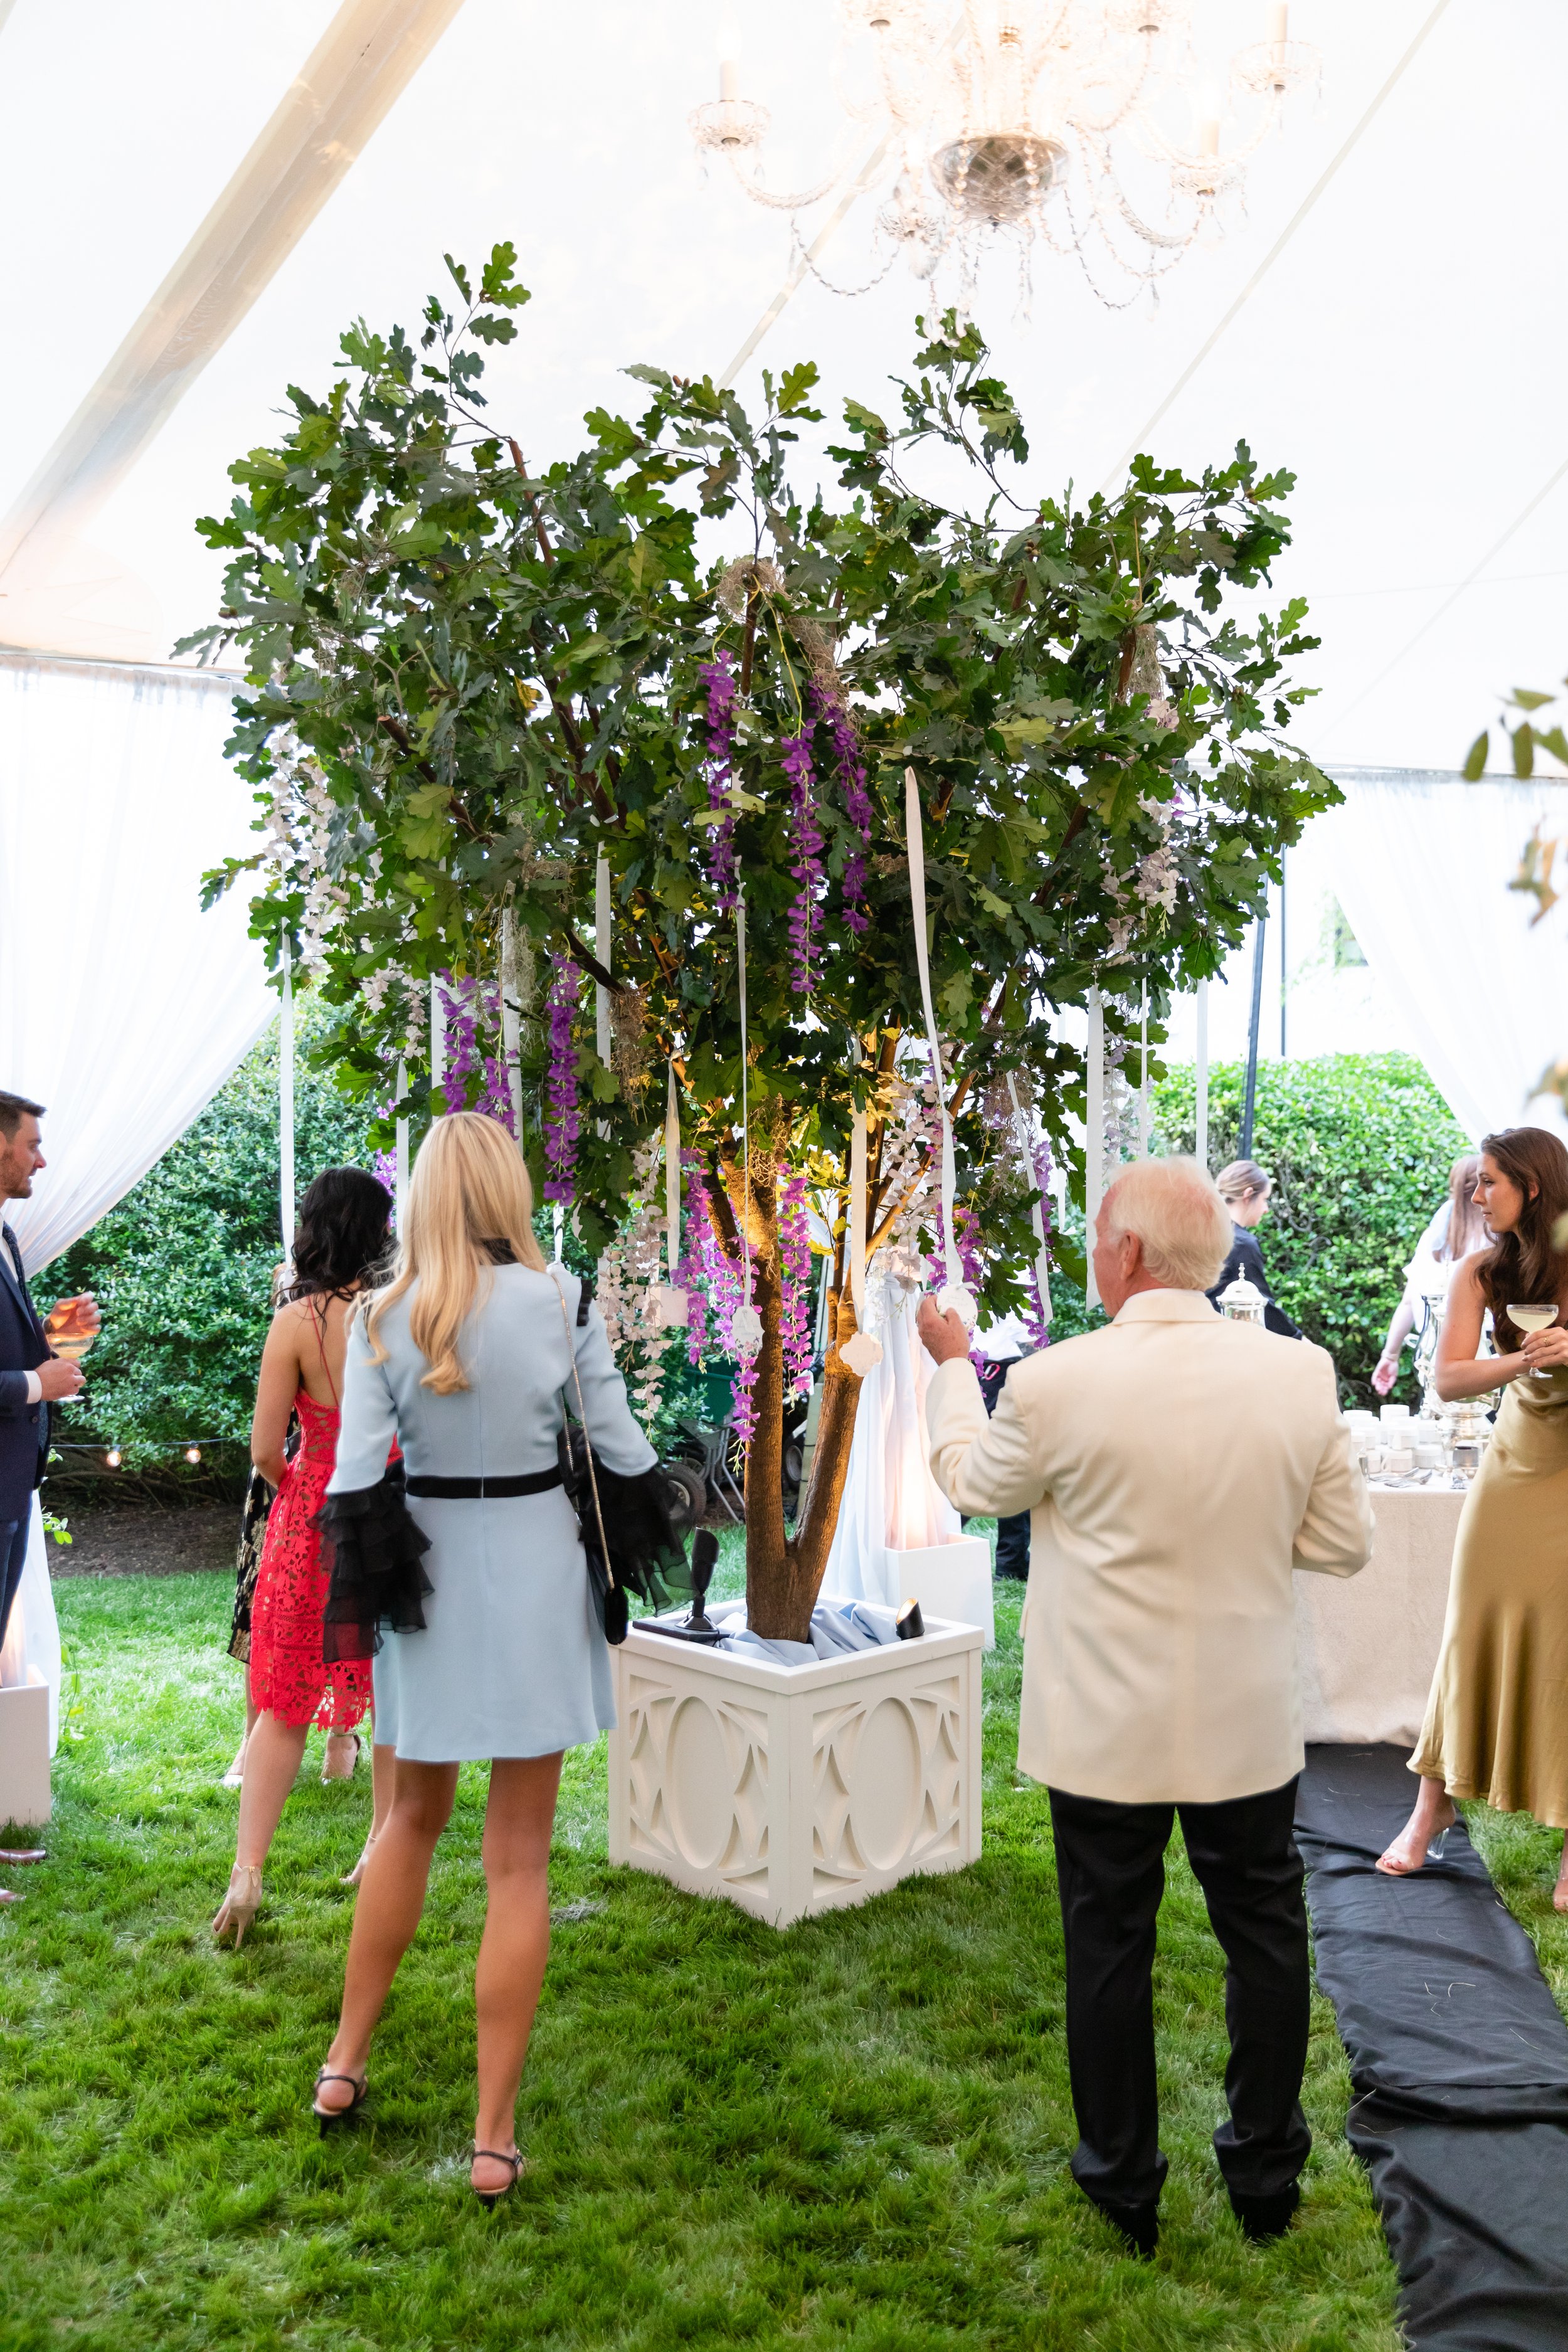 Bridgerton inspired engagement party at a private home in Nashville, TN with lush, organic floral tree installations of wisteria, spanish moss, and pastel blooms. Nashville wedding floral designer, Rosemary & Finch.